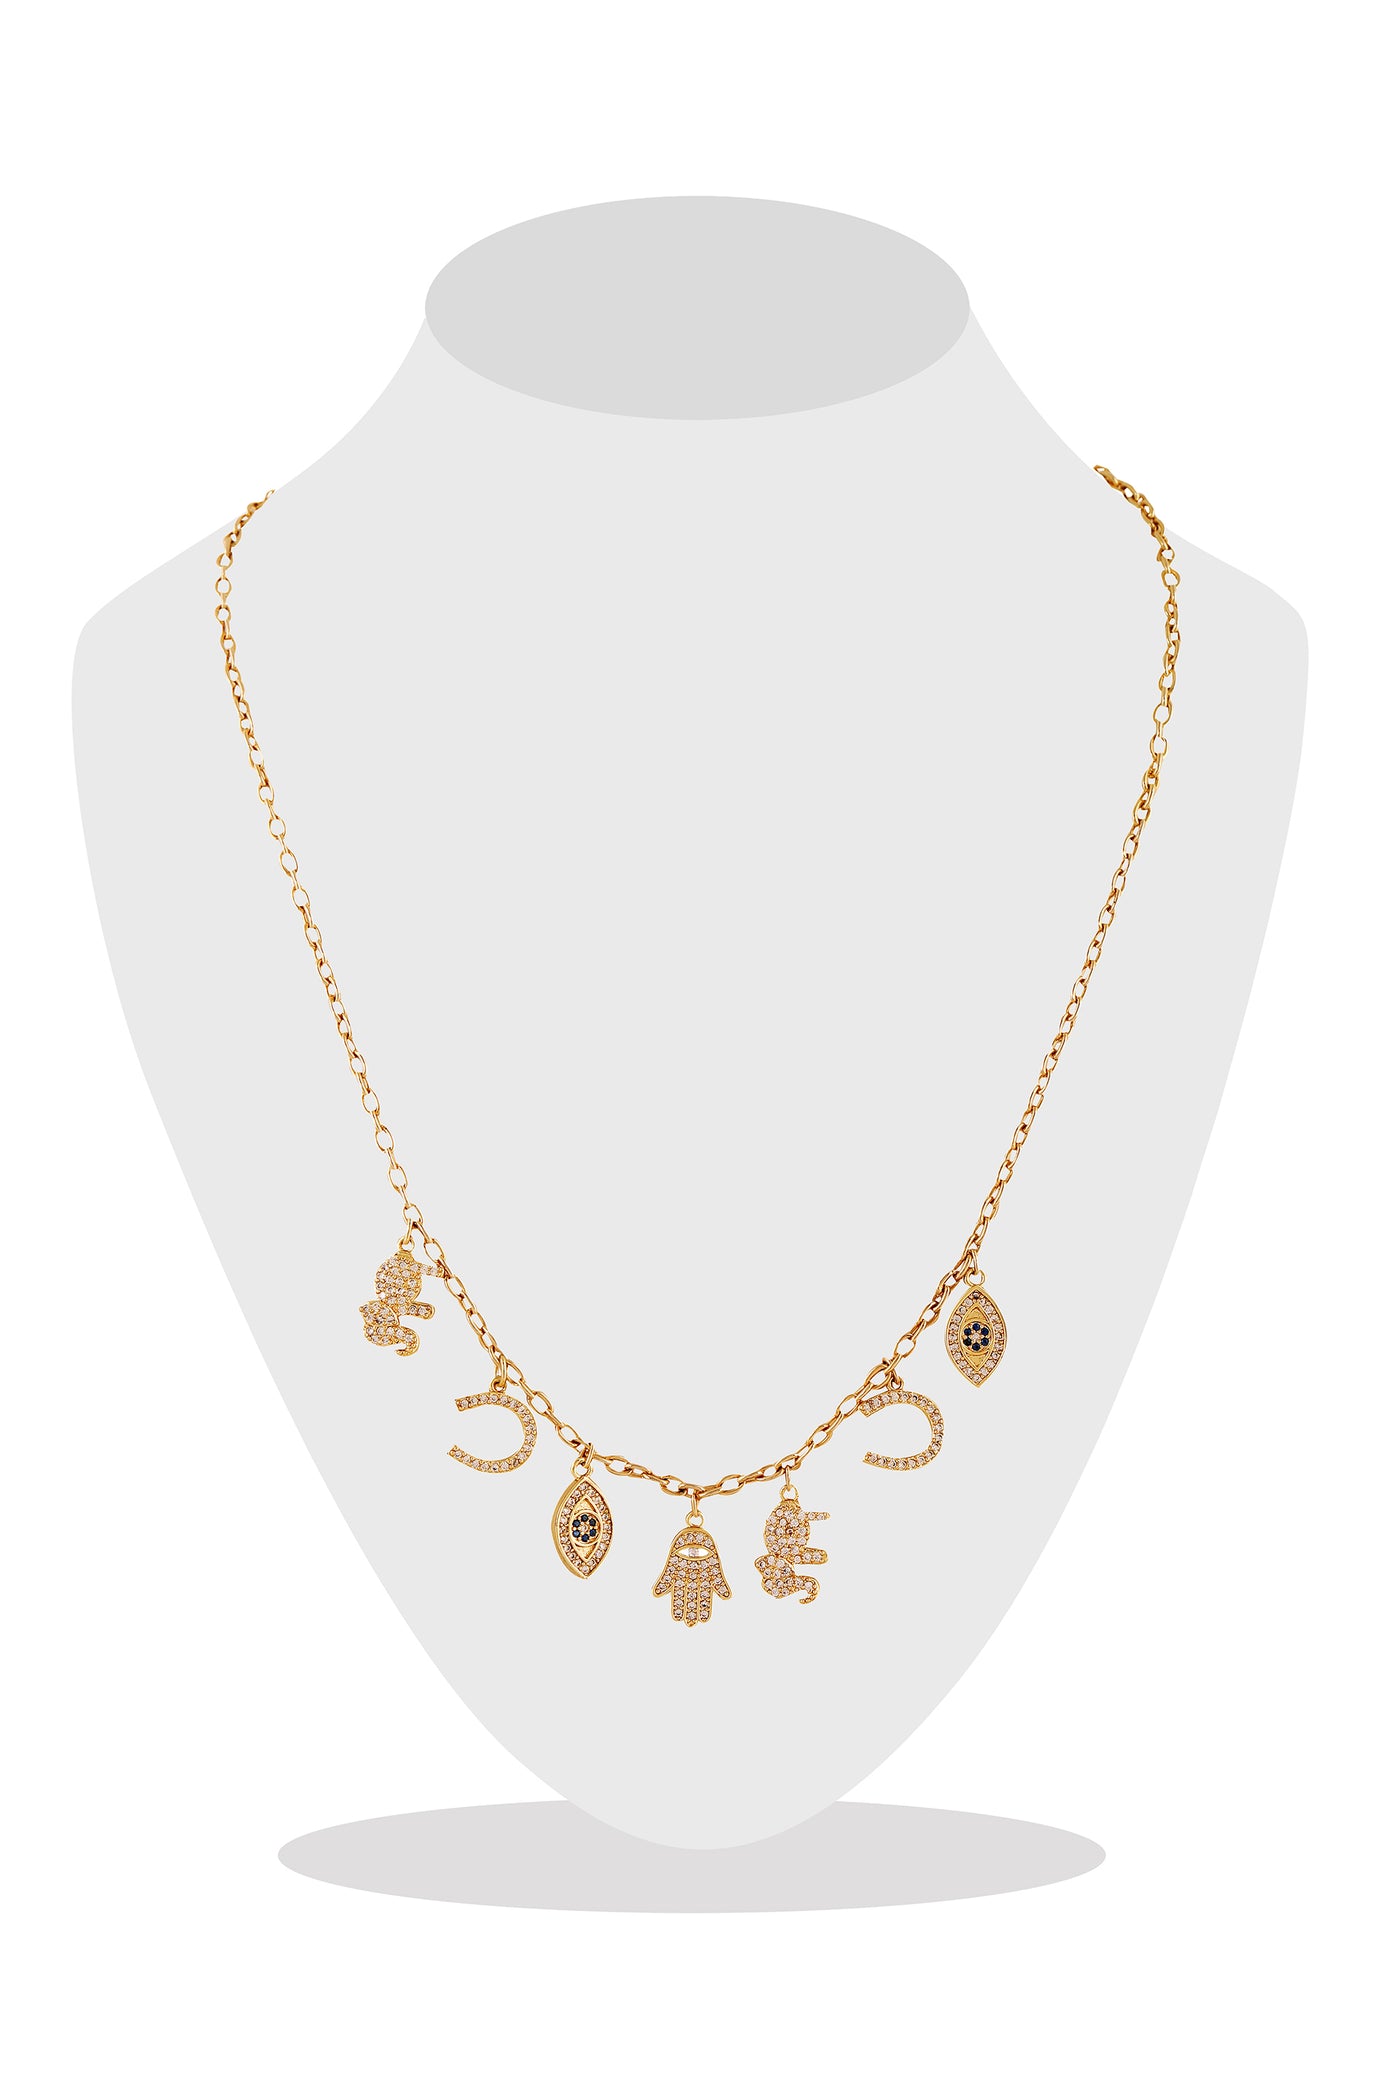 Raya jewels Lucky Charms Necklace gold online shopping melange singapore indian designer wear fashion jewellery